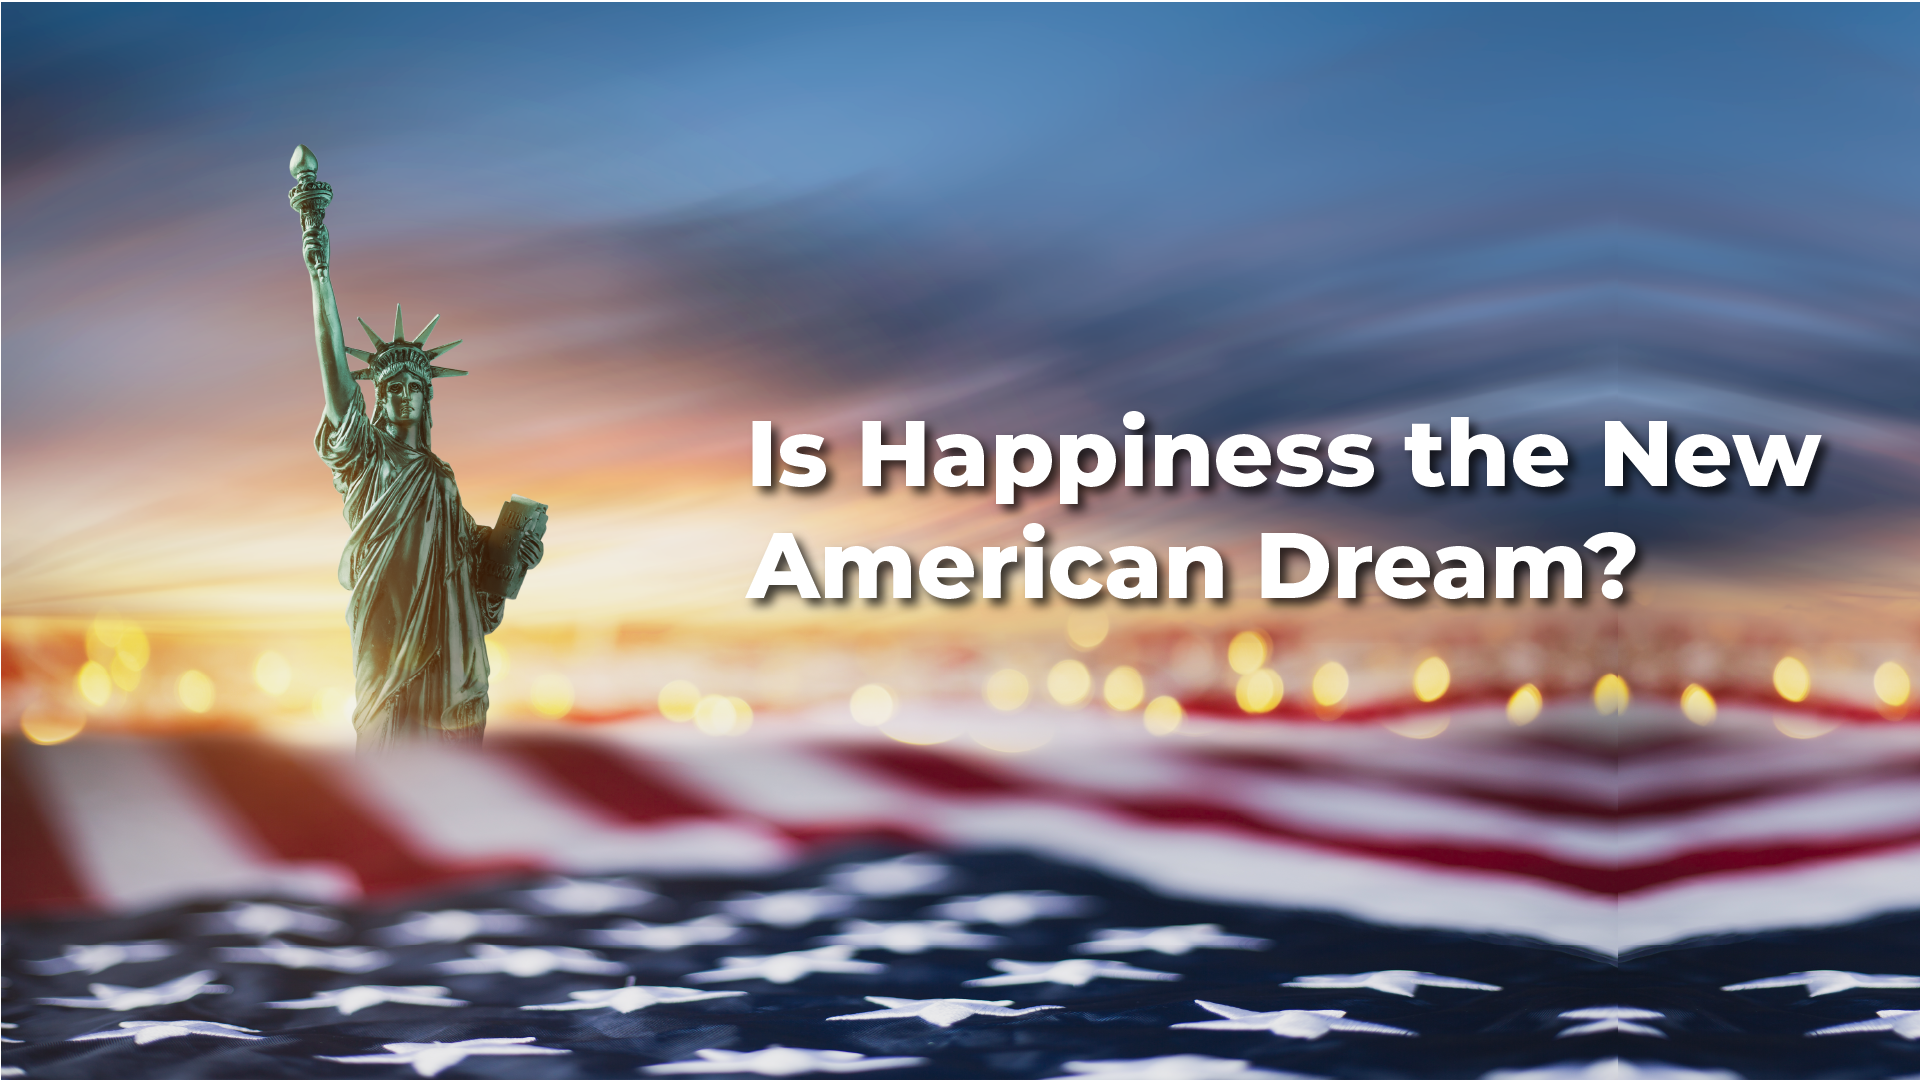 Happiness: The New American Dream